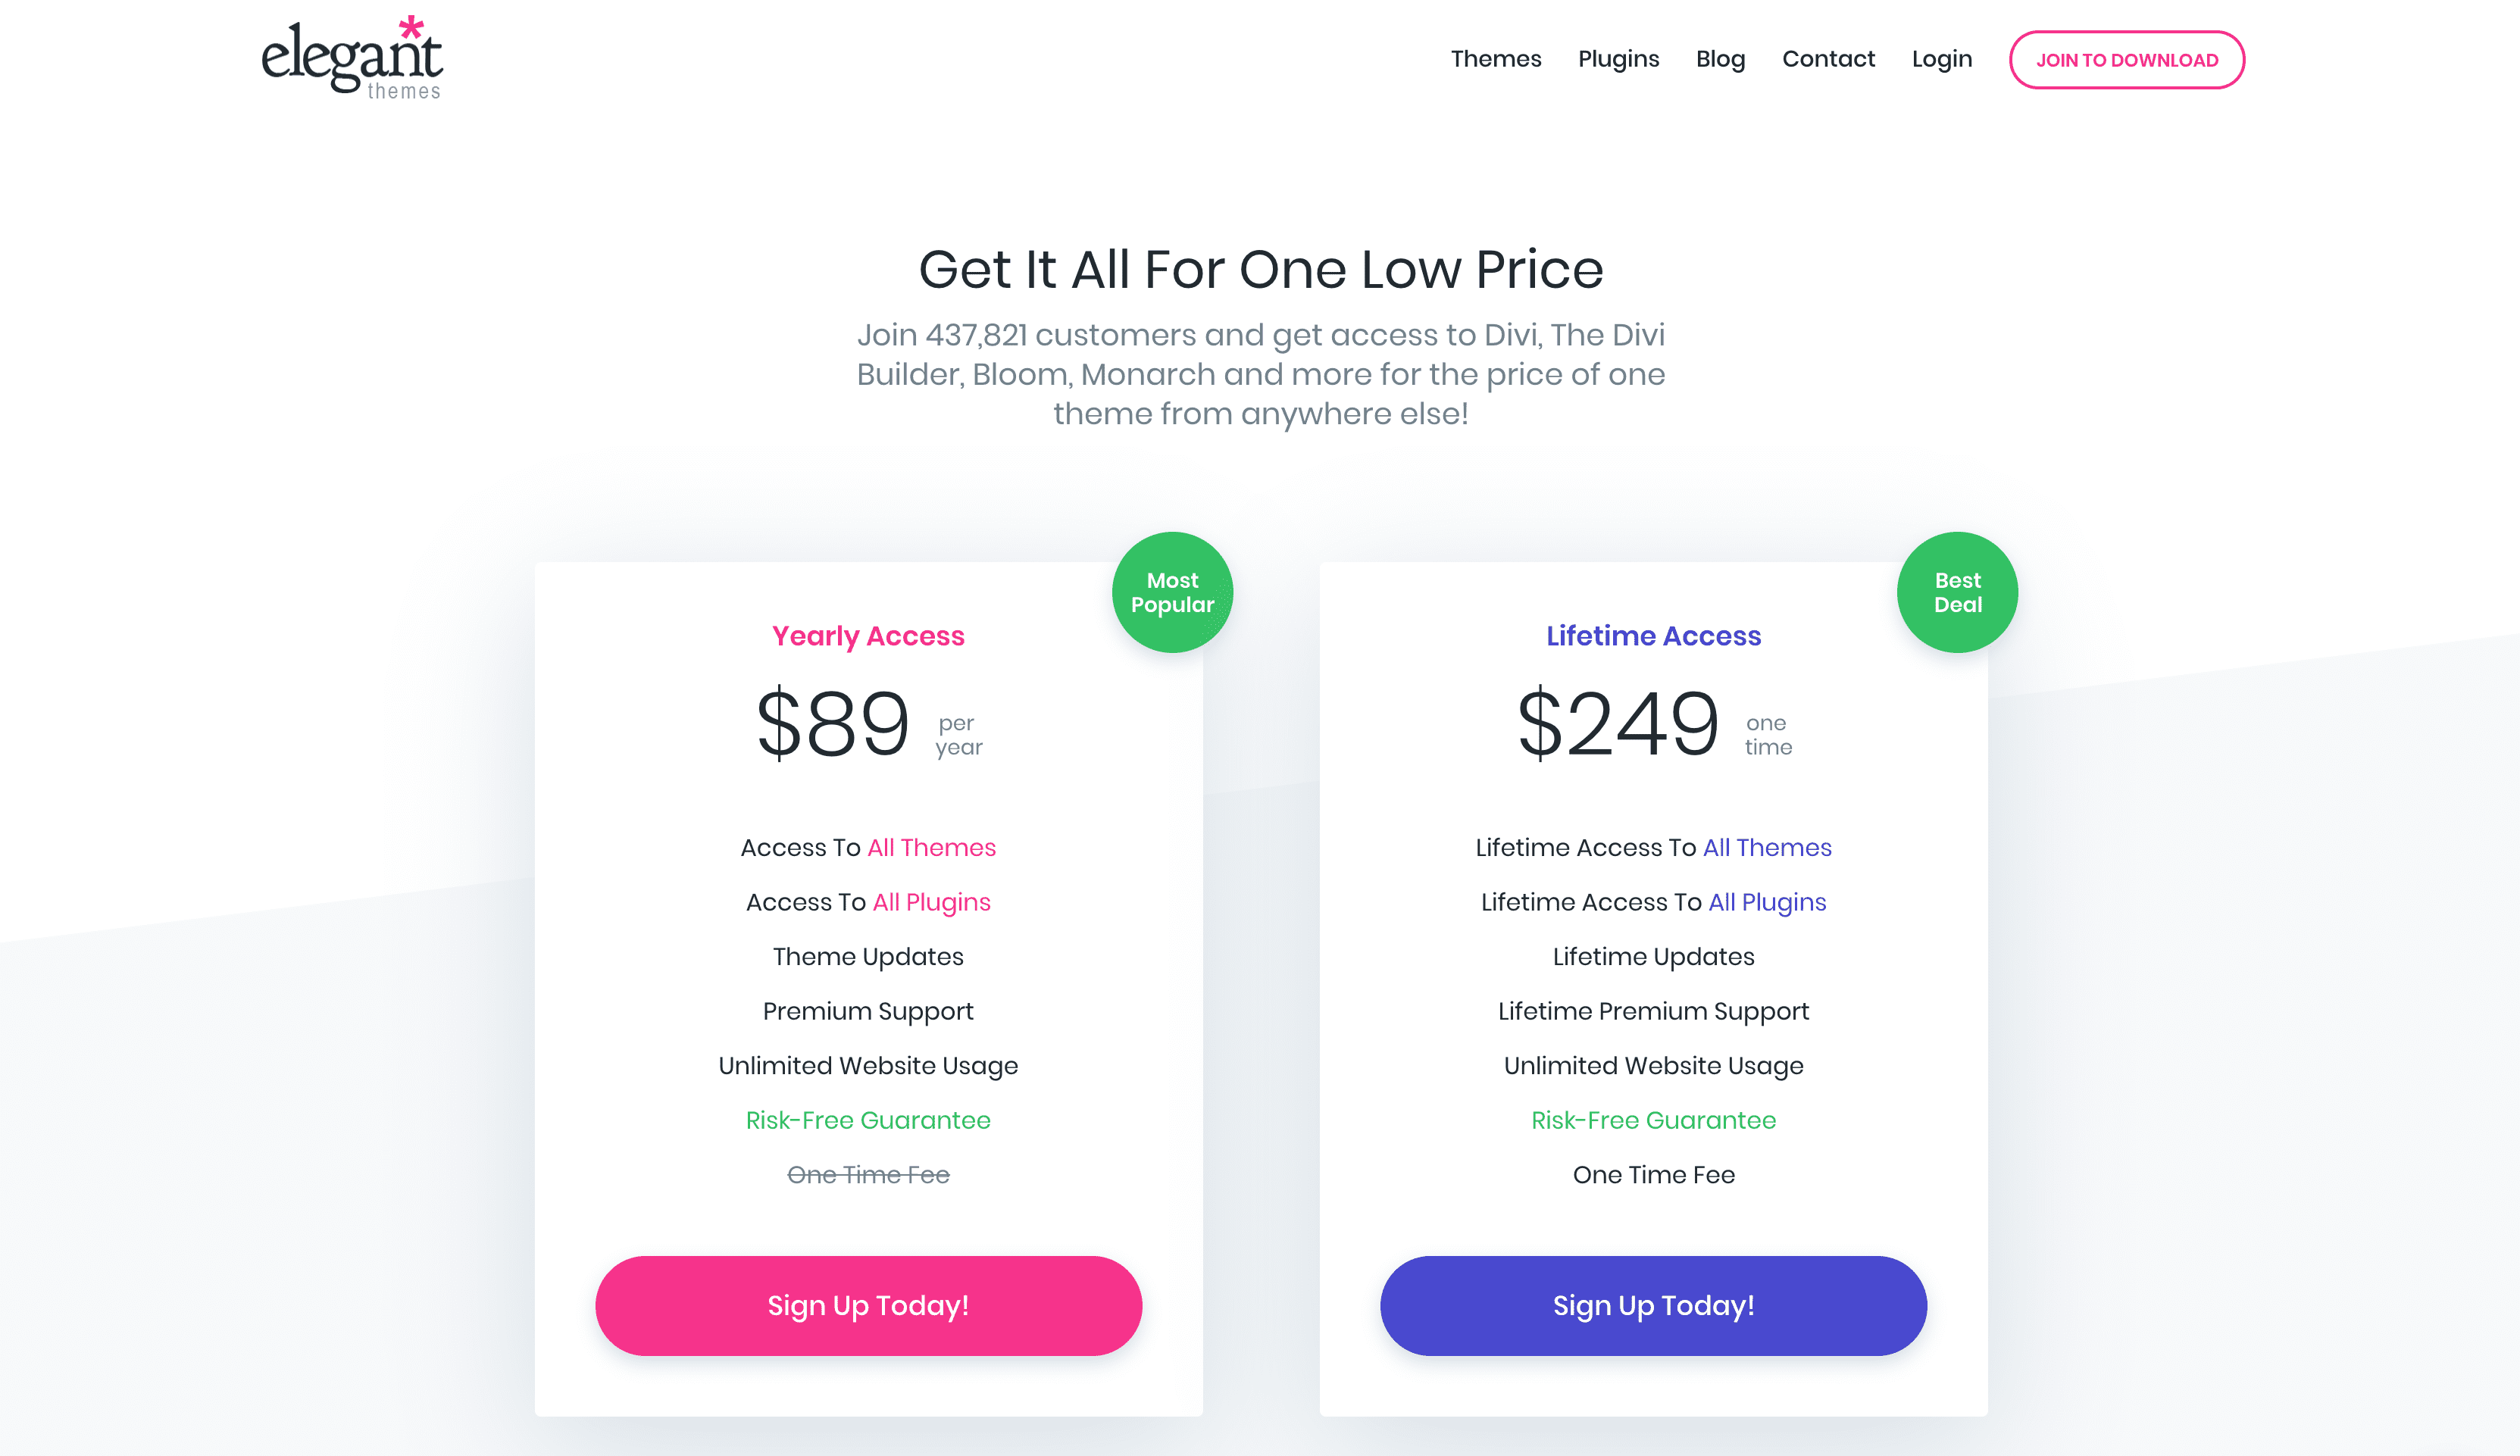 The Elegant Themes pricing page.